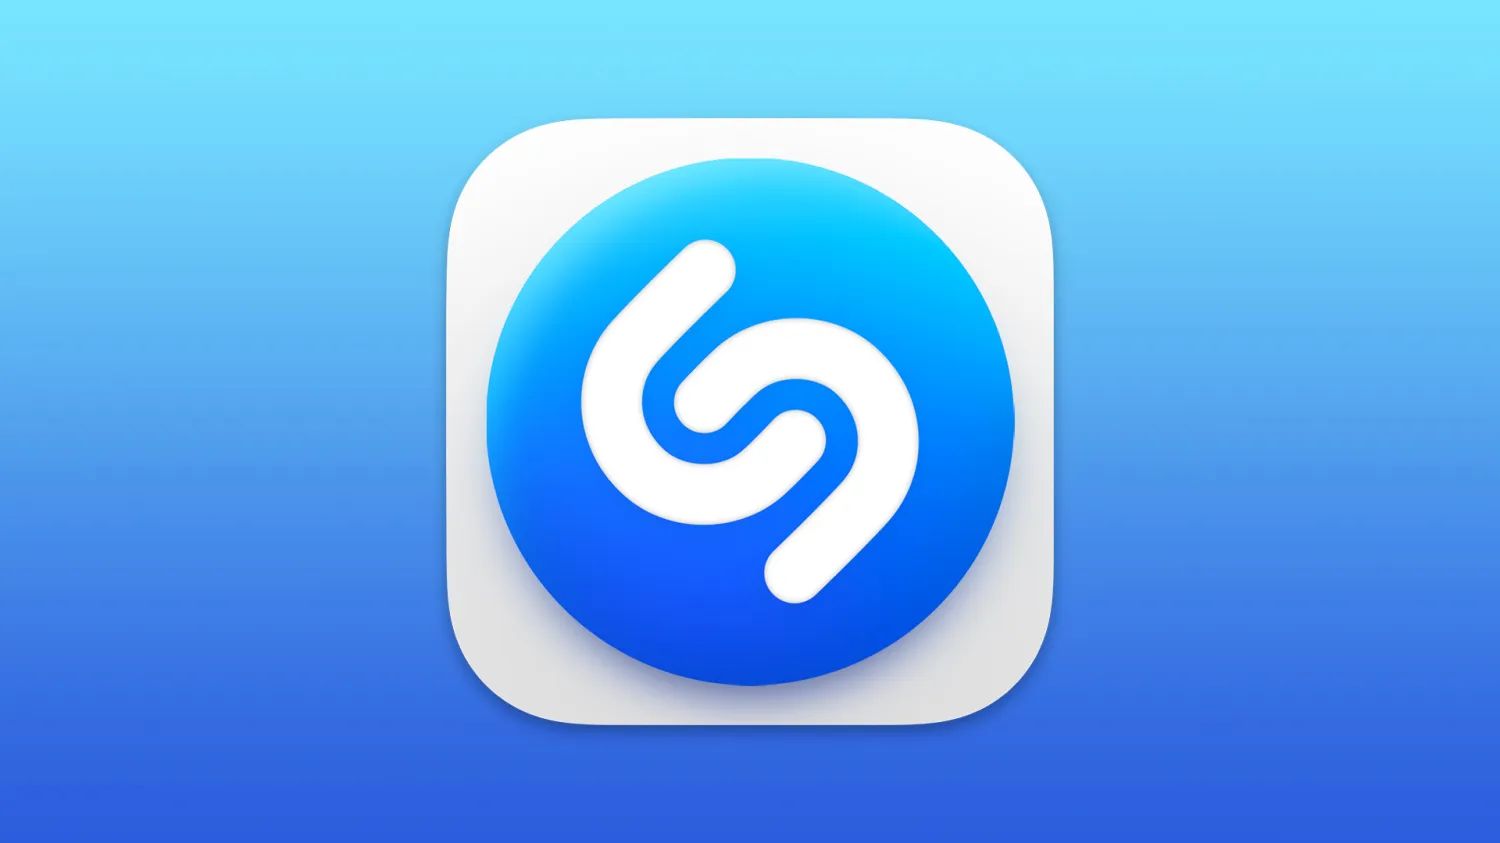 Users can utilize Shazam from the Control Center toggle for background music detection